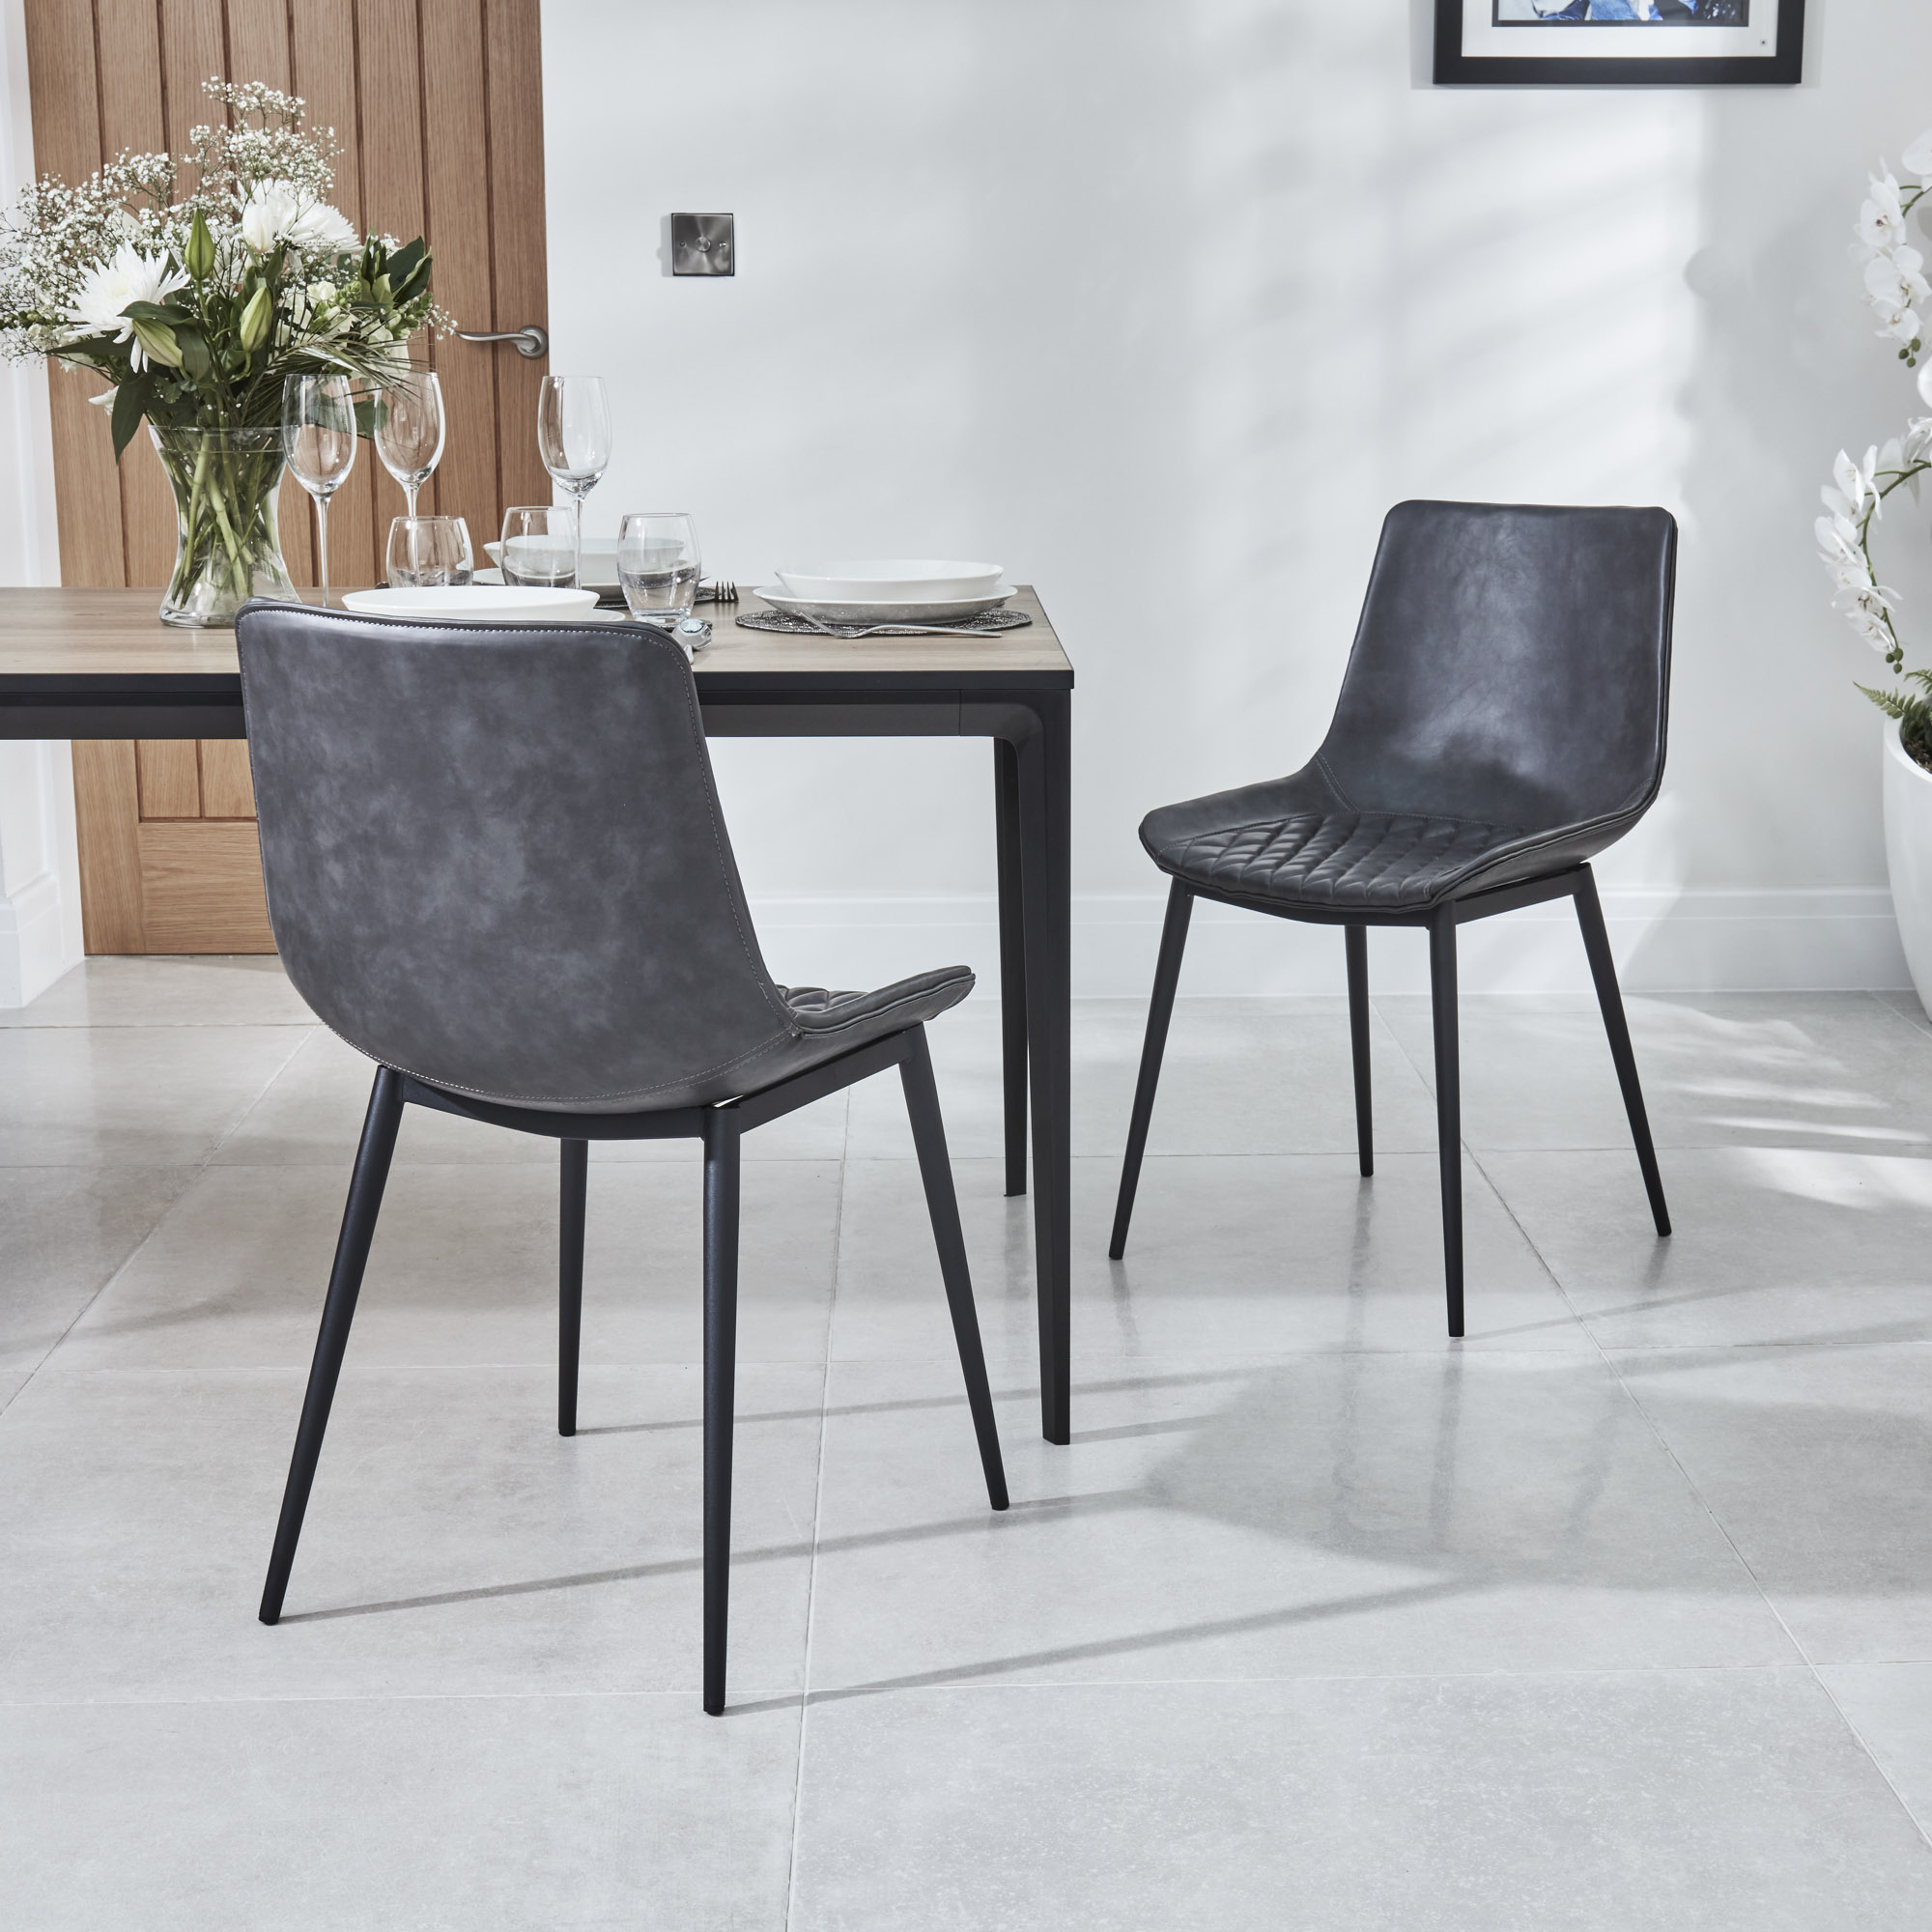 Bellagio 1.6M White Sintered Stone Dining Table with 4x Leo Grey Dining Chairs